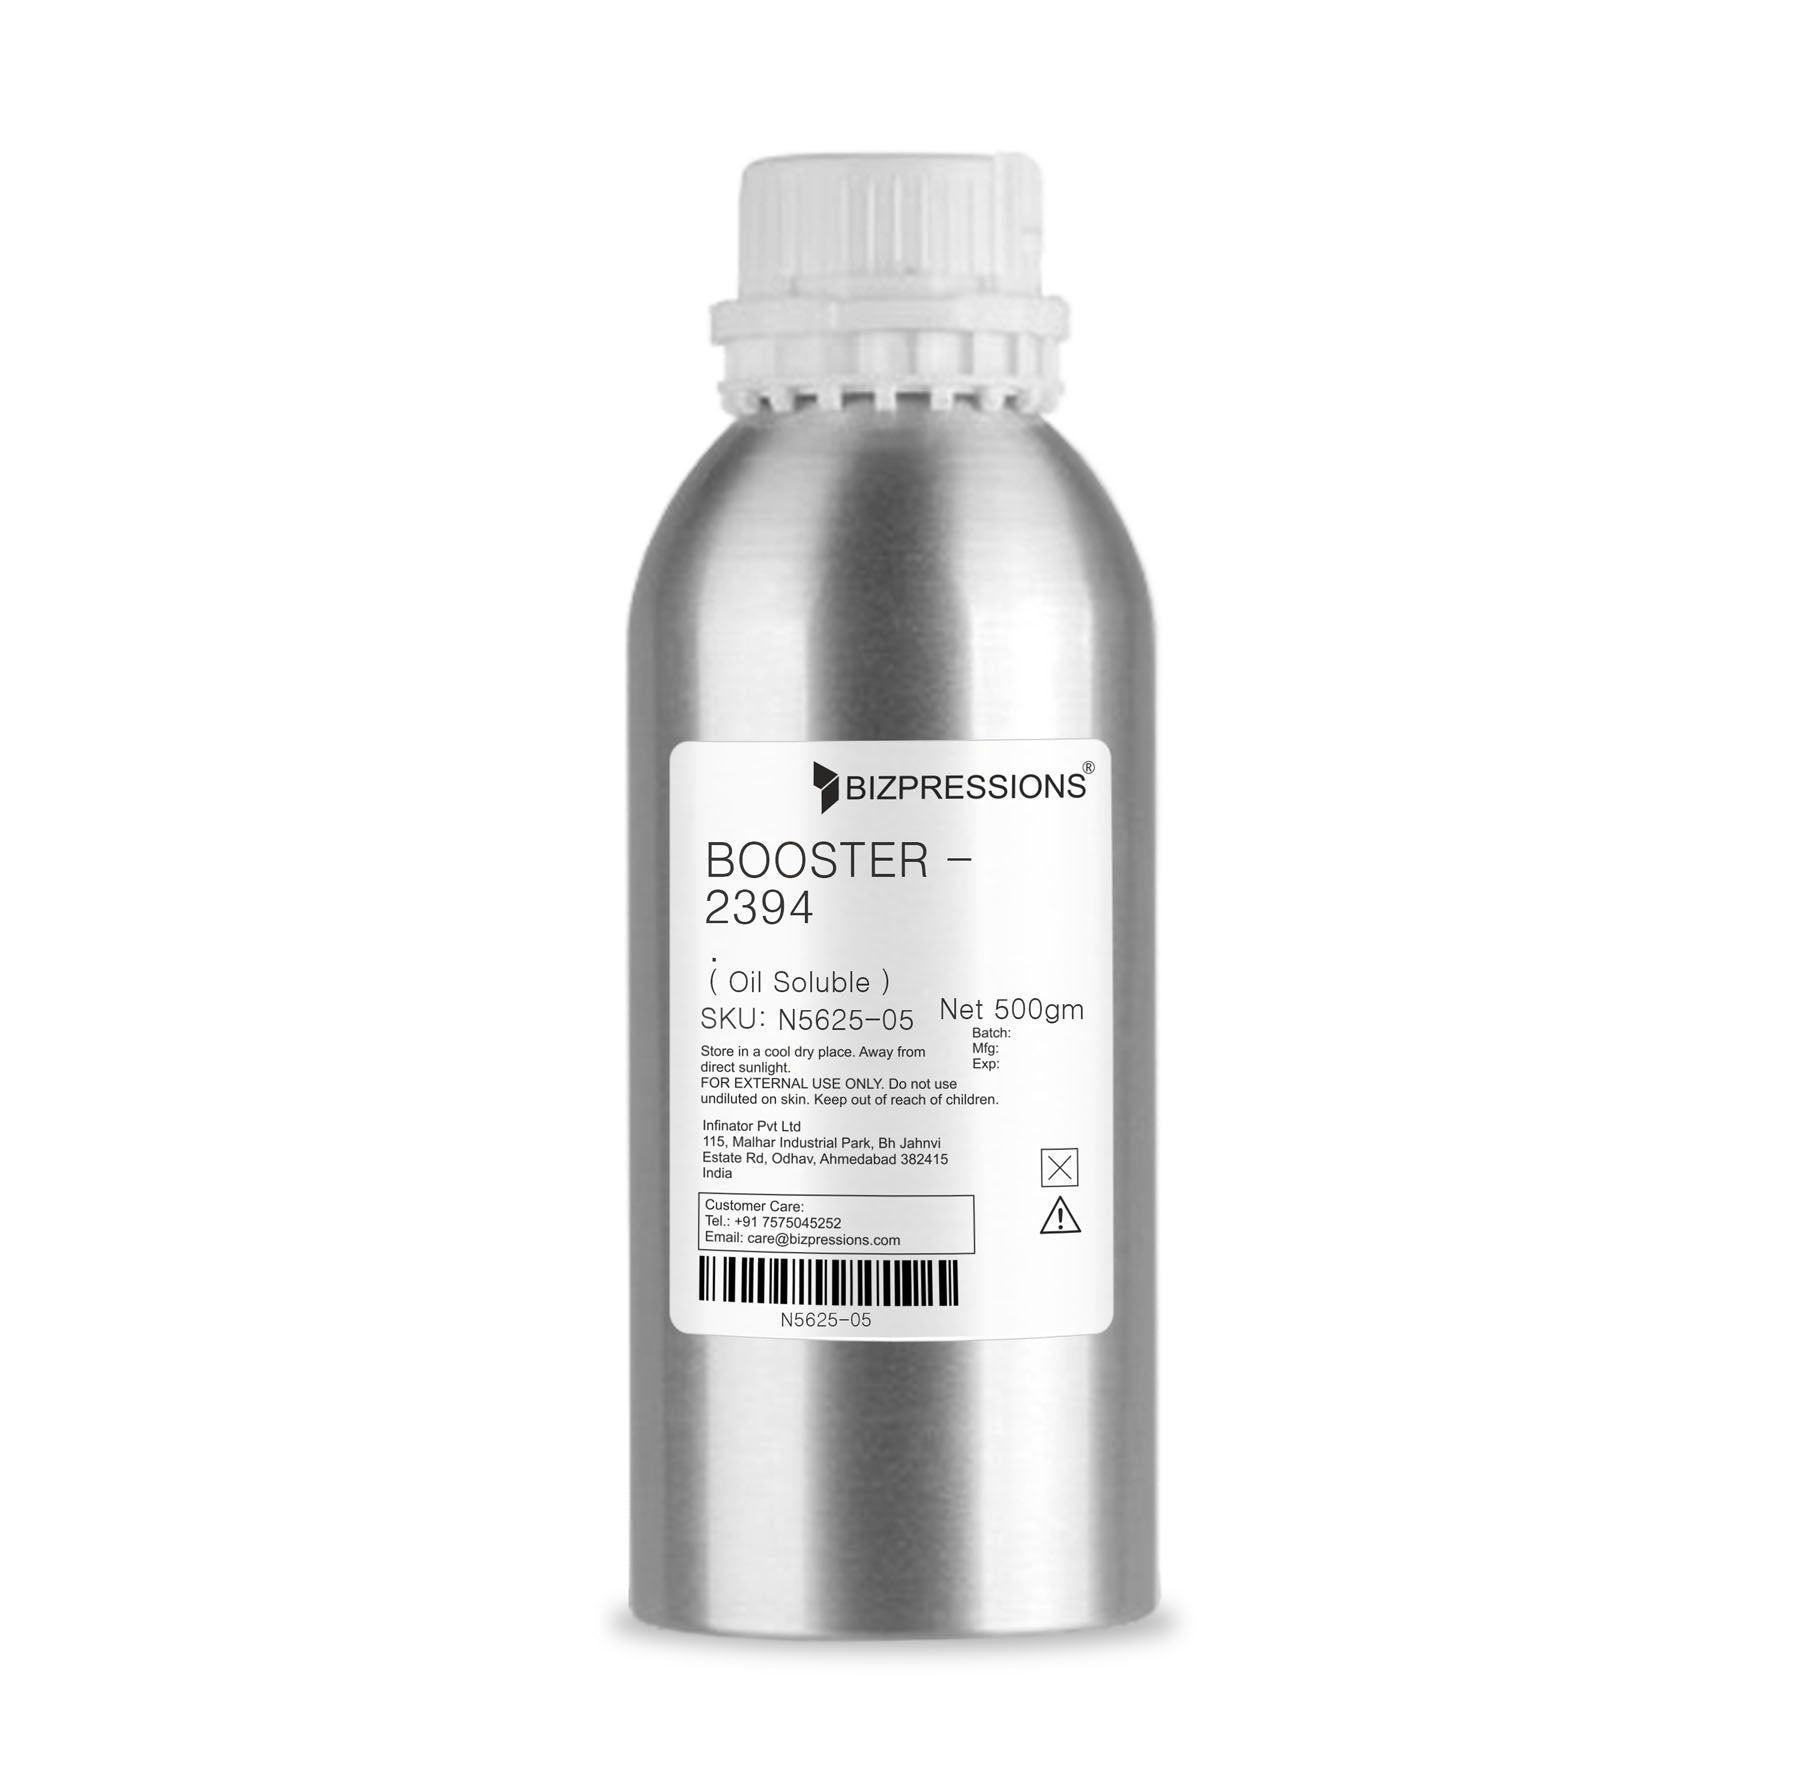 BOOSTER - 2394 - Fragrance ( Oil Soluble ) - 500 gm